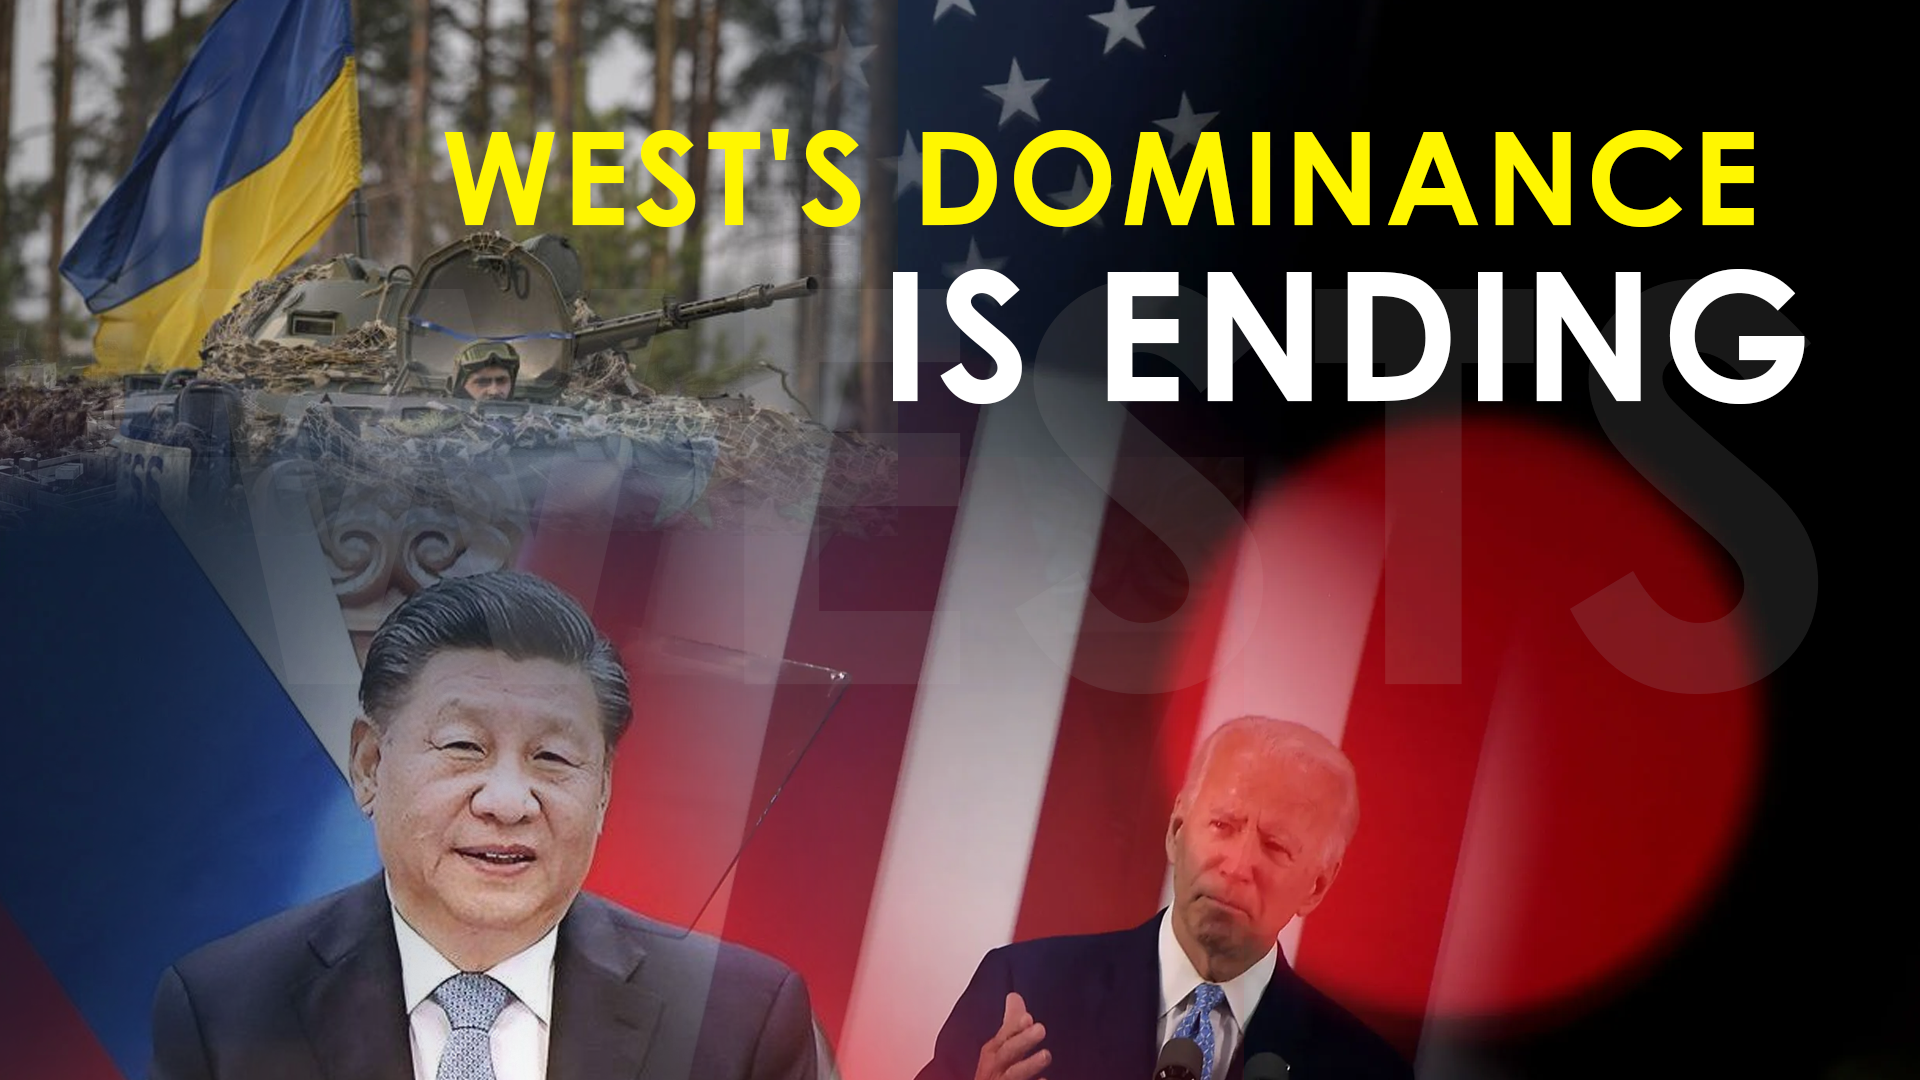 The West’s dominance is ending